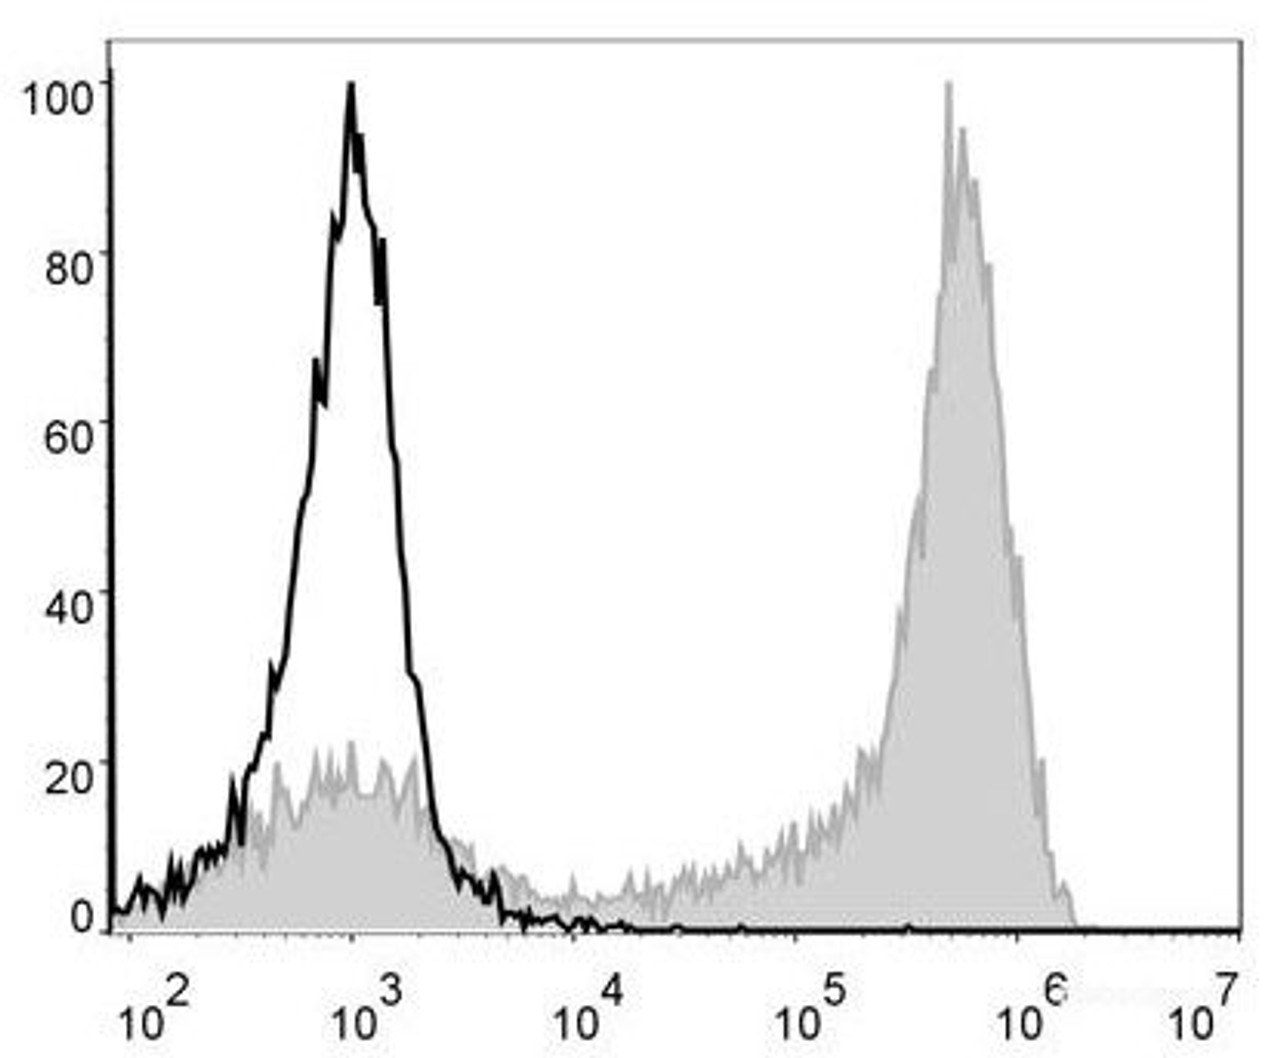 Mouse bone marrow cells are stained with PE/Cyanine5 Anti-Mouse Ly6G Antibody[Used at .2 μg/1<sup>6</sup> cells dilution](filled gray histogram). Unstained bone marrow cells (blank black histogram) are used as control.